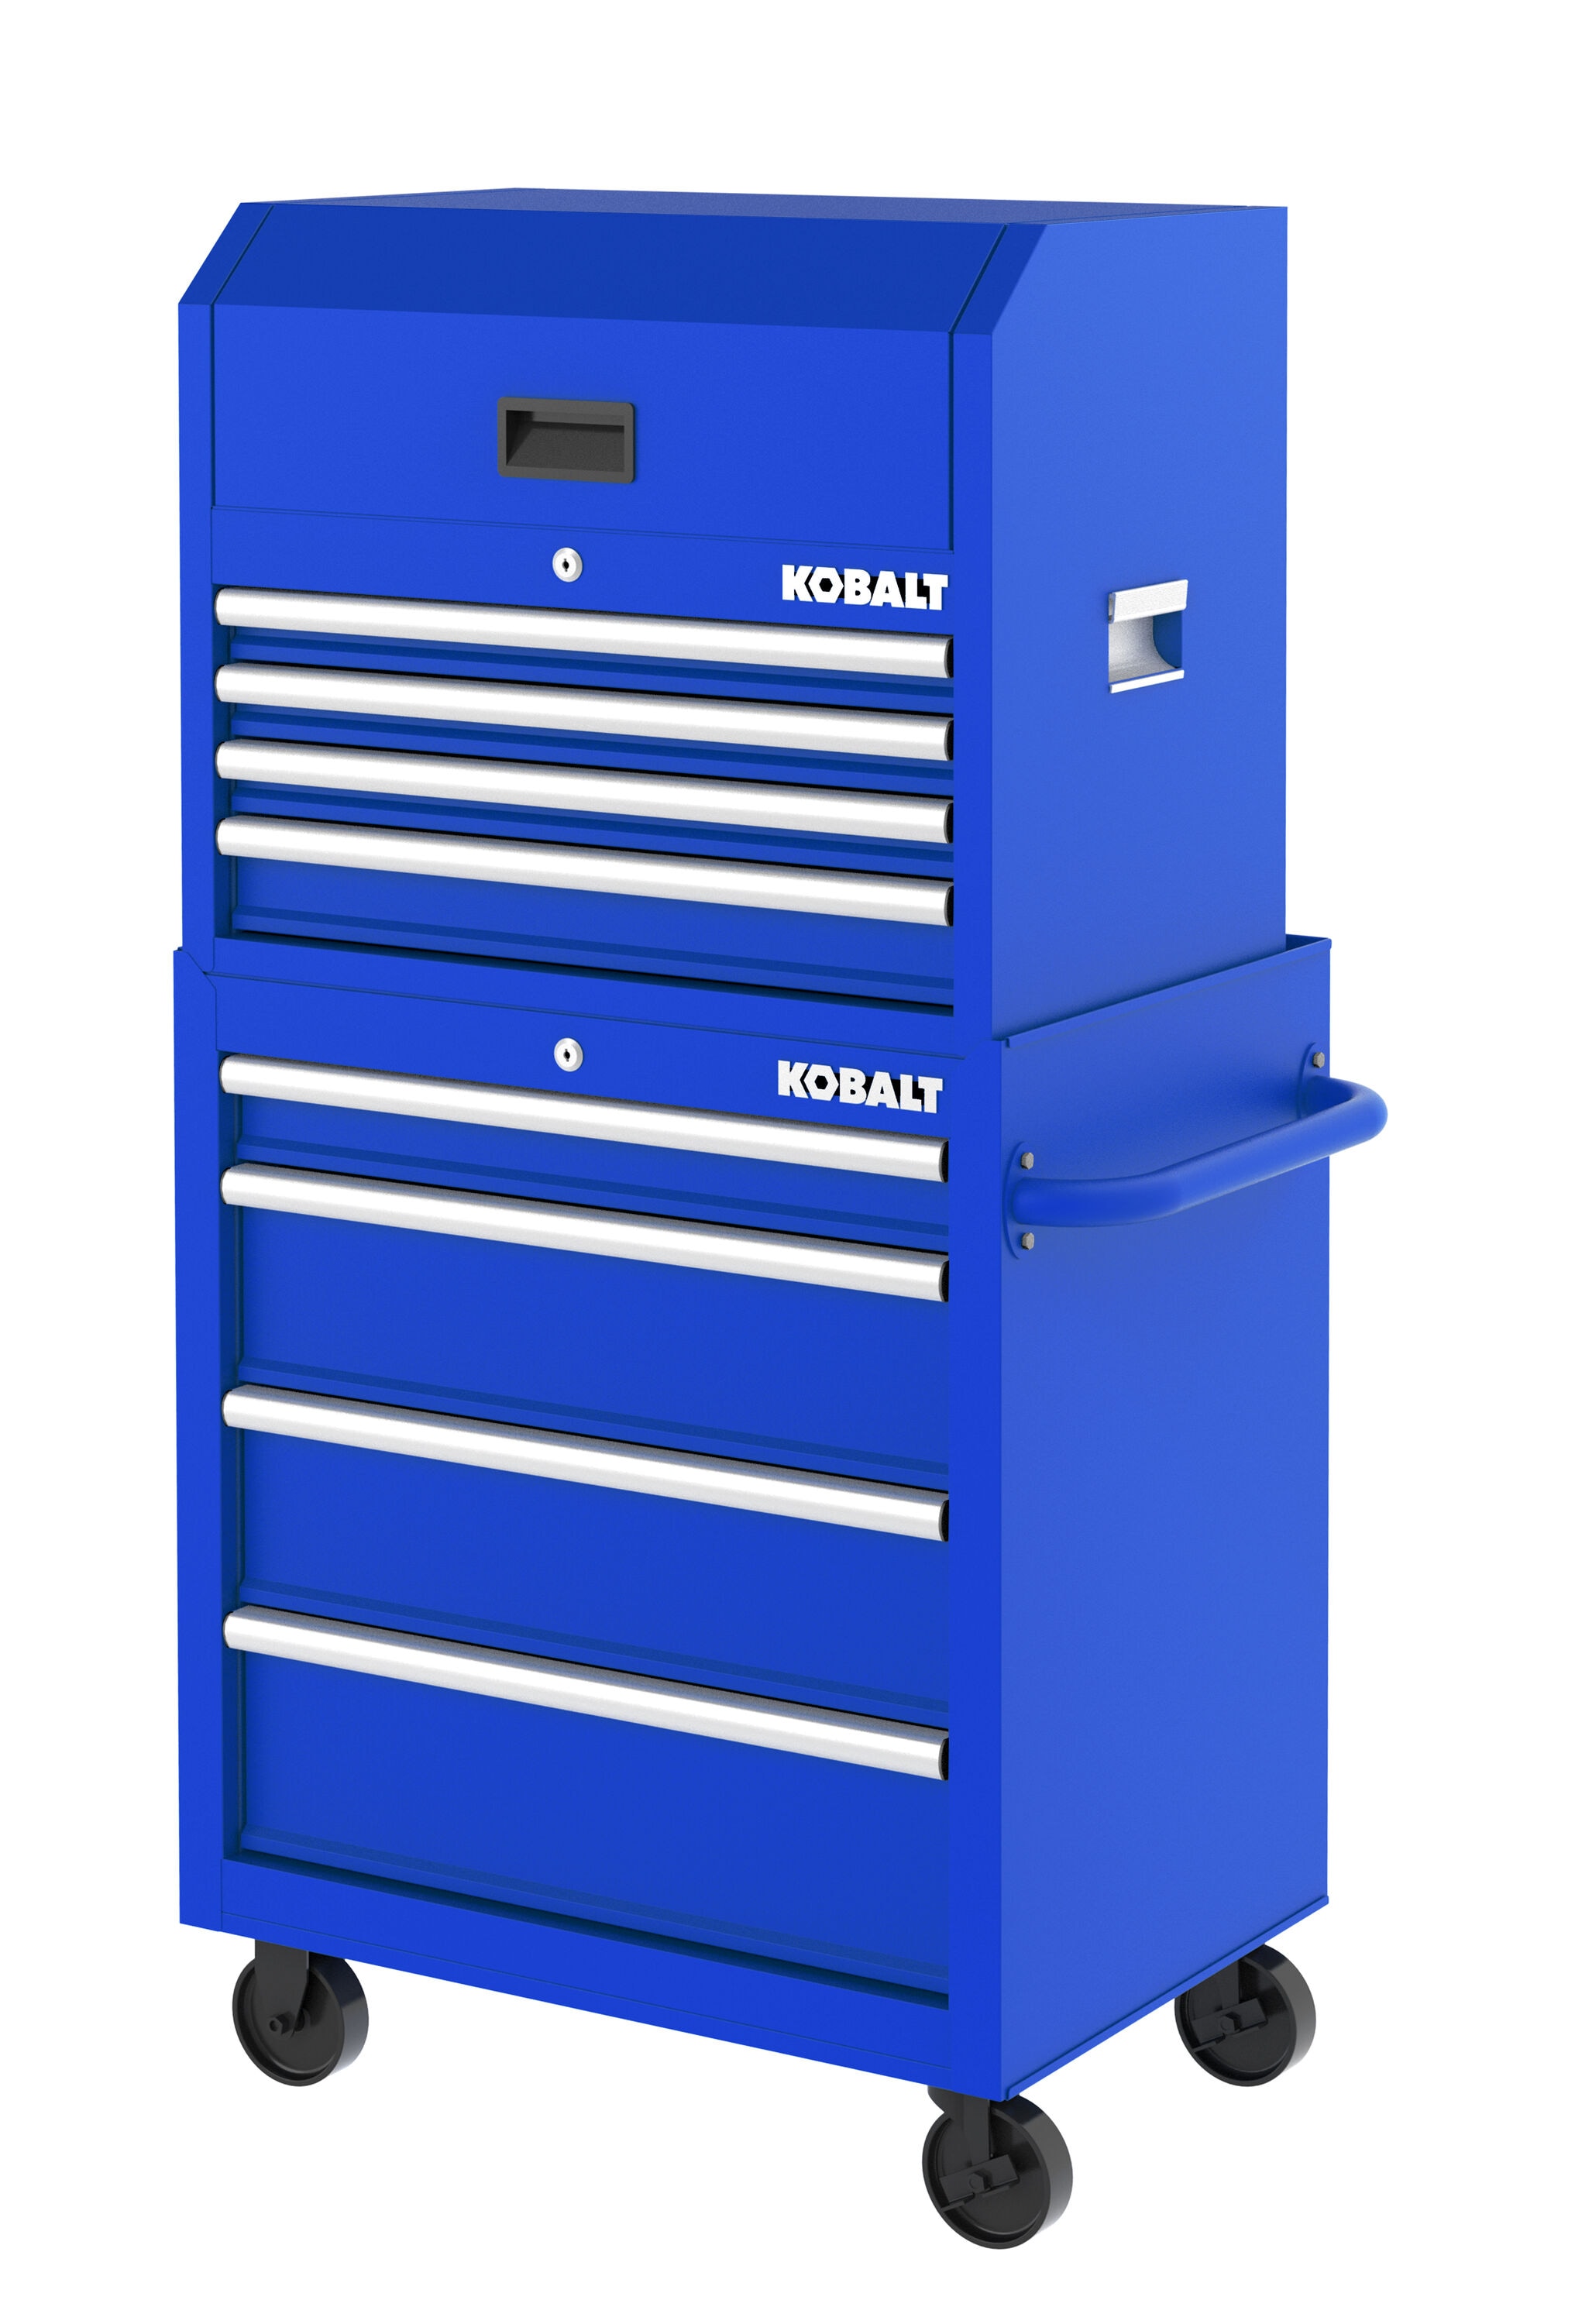 Big Red Drawer 20 in. Metal Tool Box Portable Steel Tool Chest with Ball-Bearing Slides and 2 Metal Latches Closure, Blue